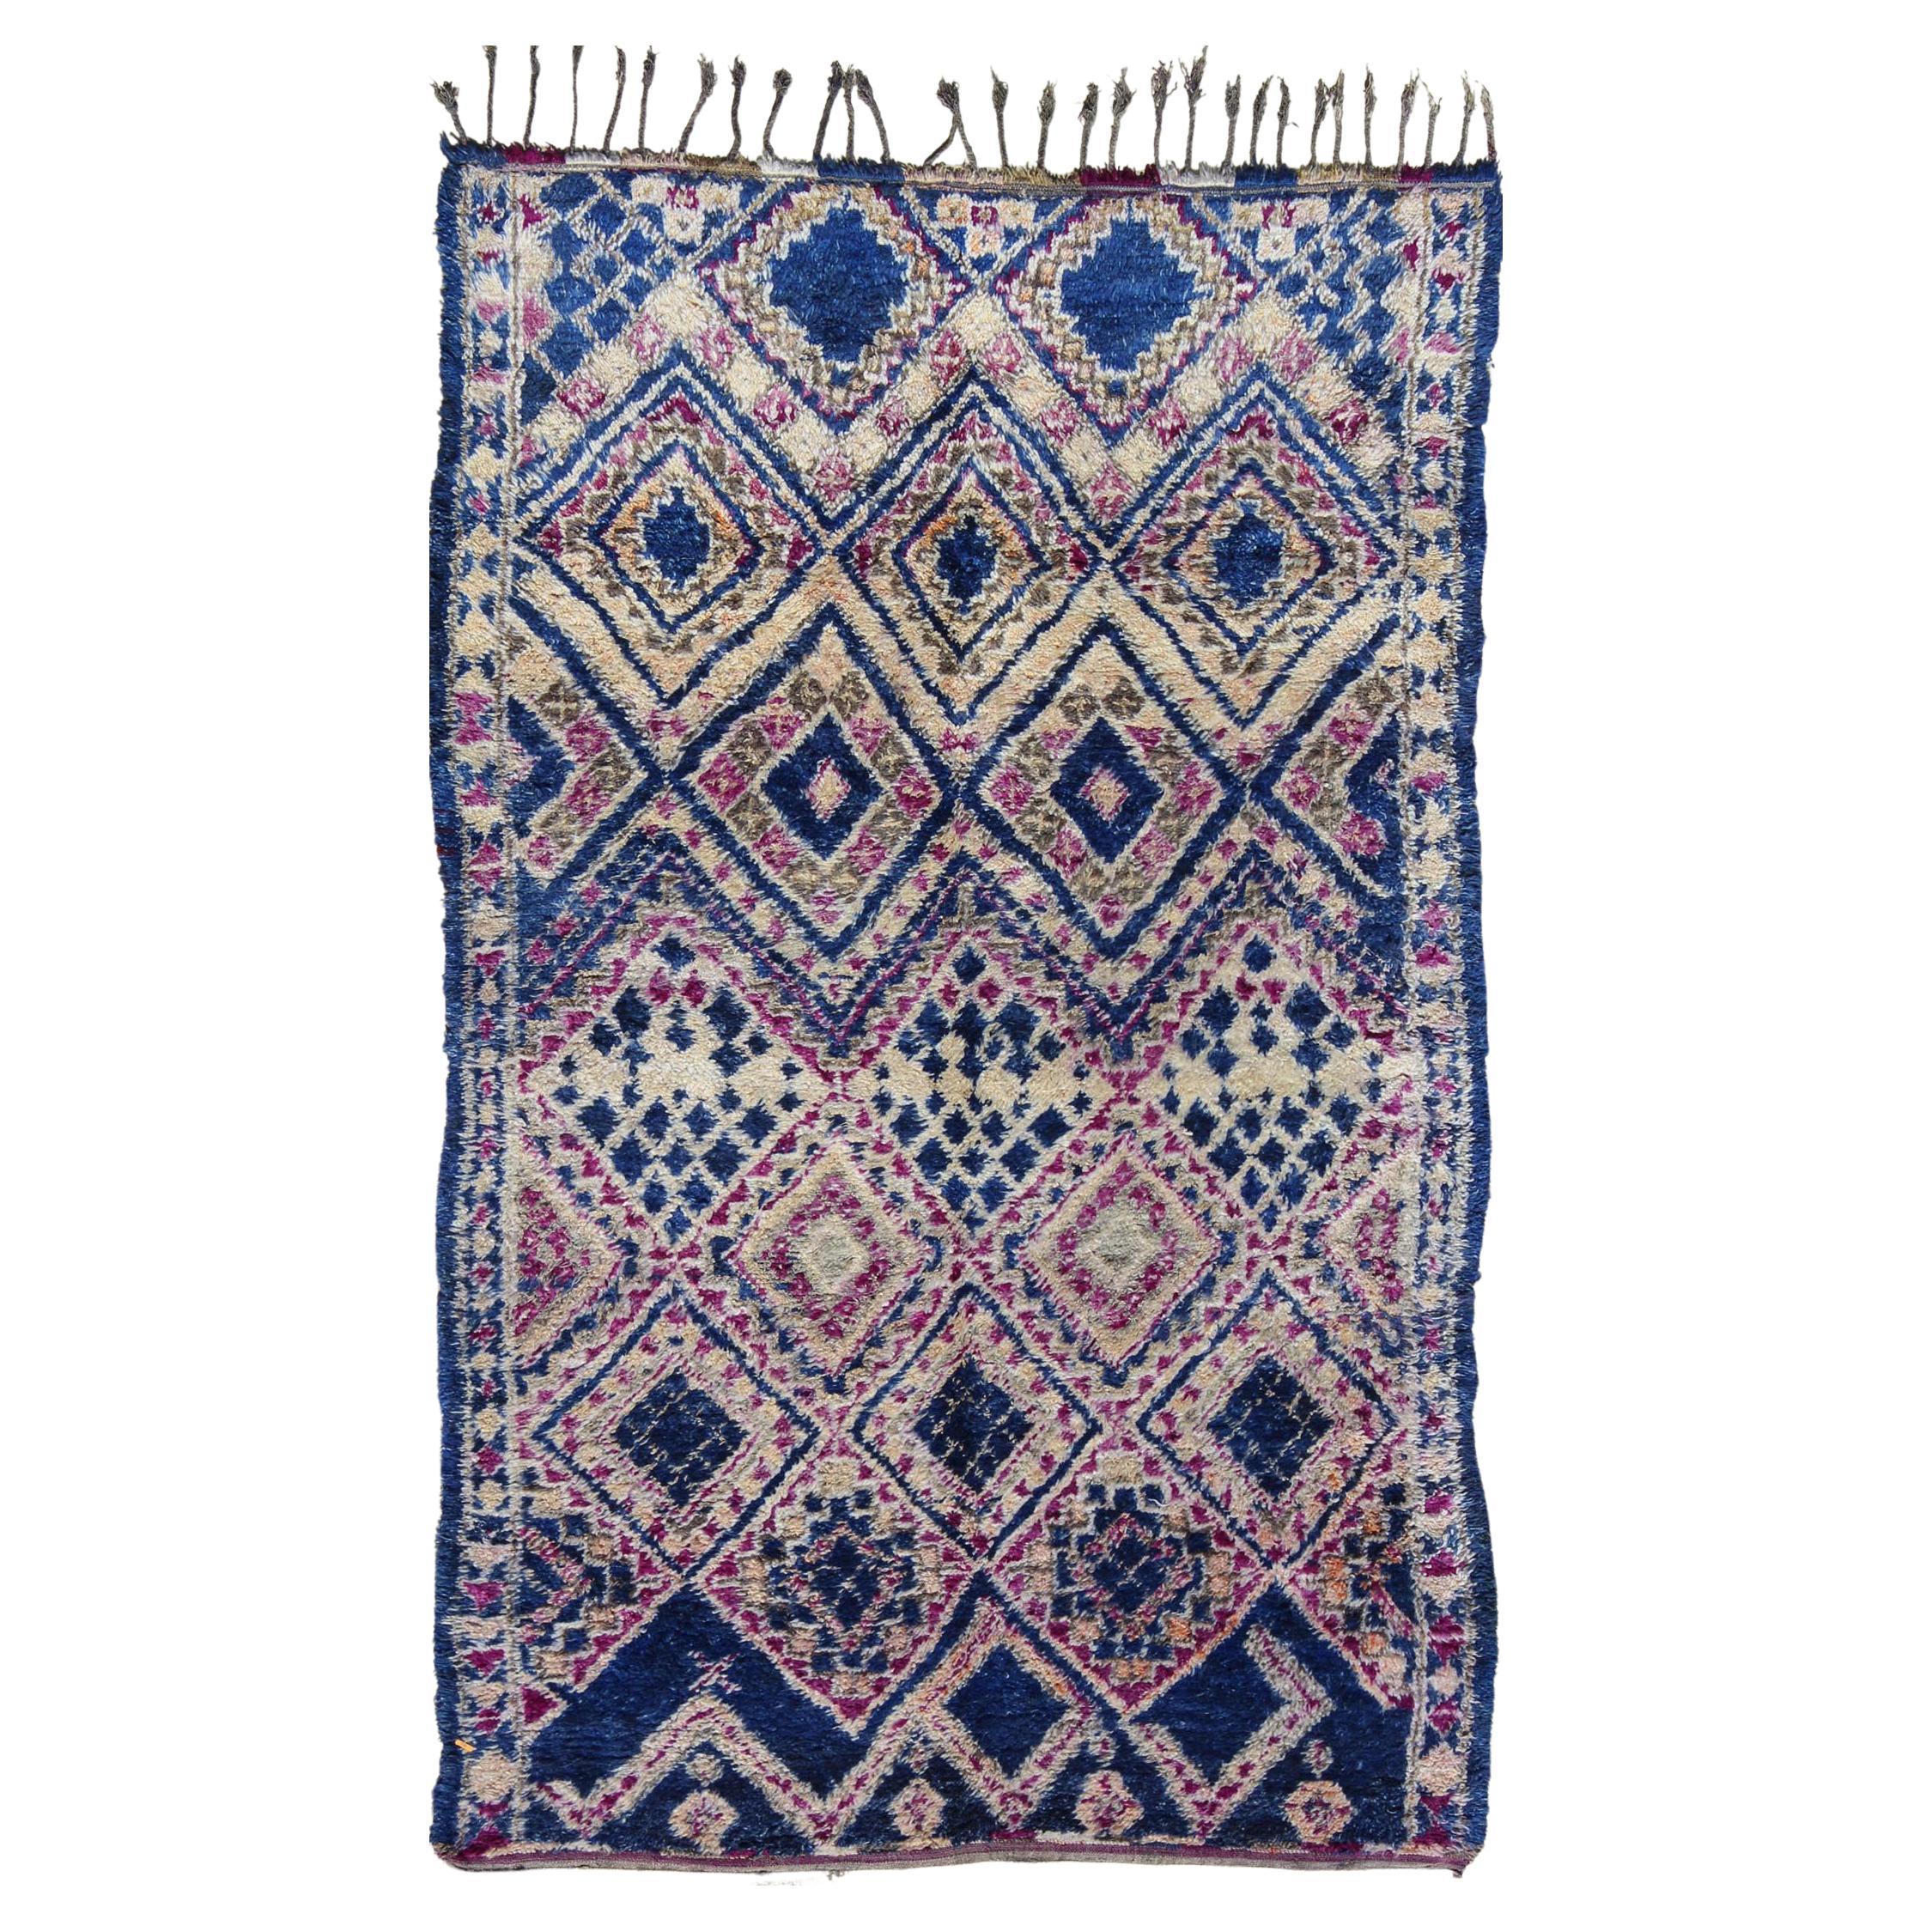 Vintage Blue Hand Knotted Moroccan Rug with All-Over Diamond Design